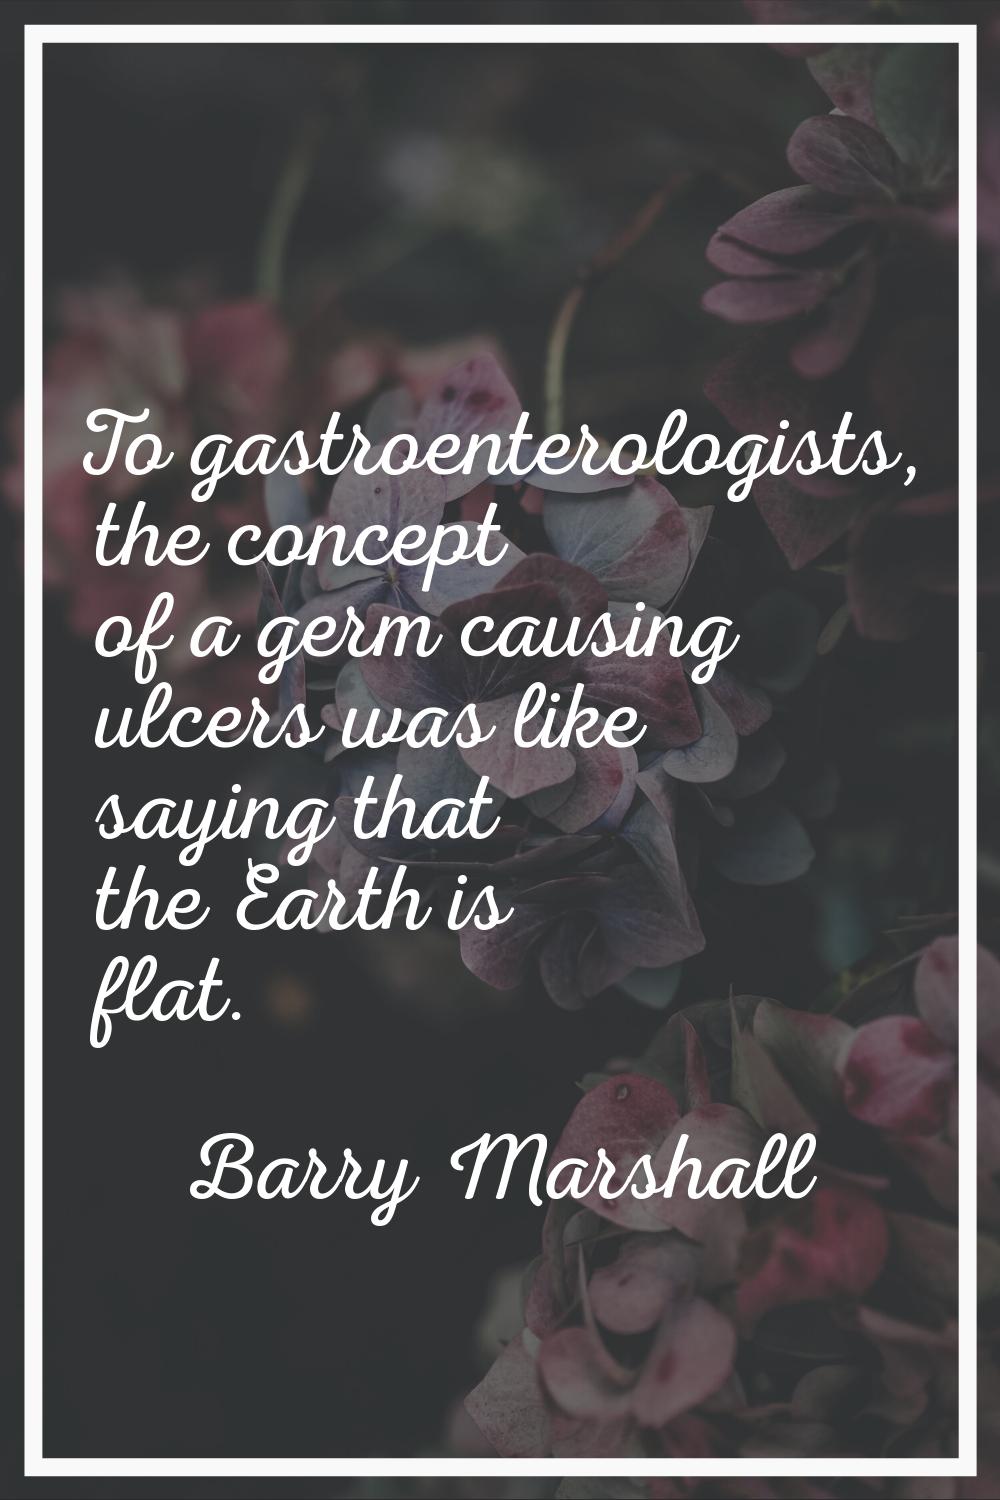 To gastroenterologists, the concept of a germ causing ulcers was like saying that the Earth is flat